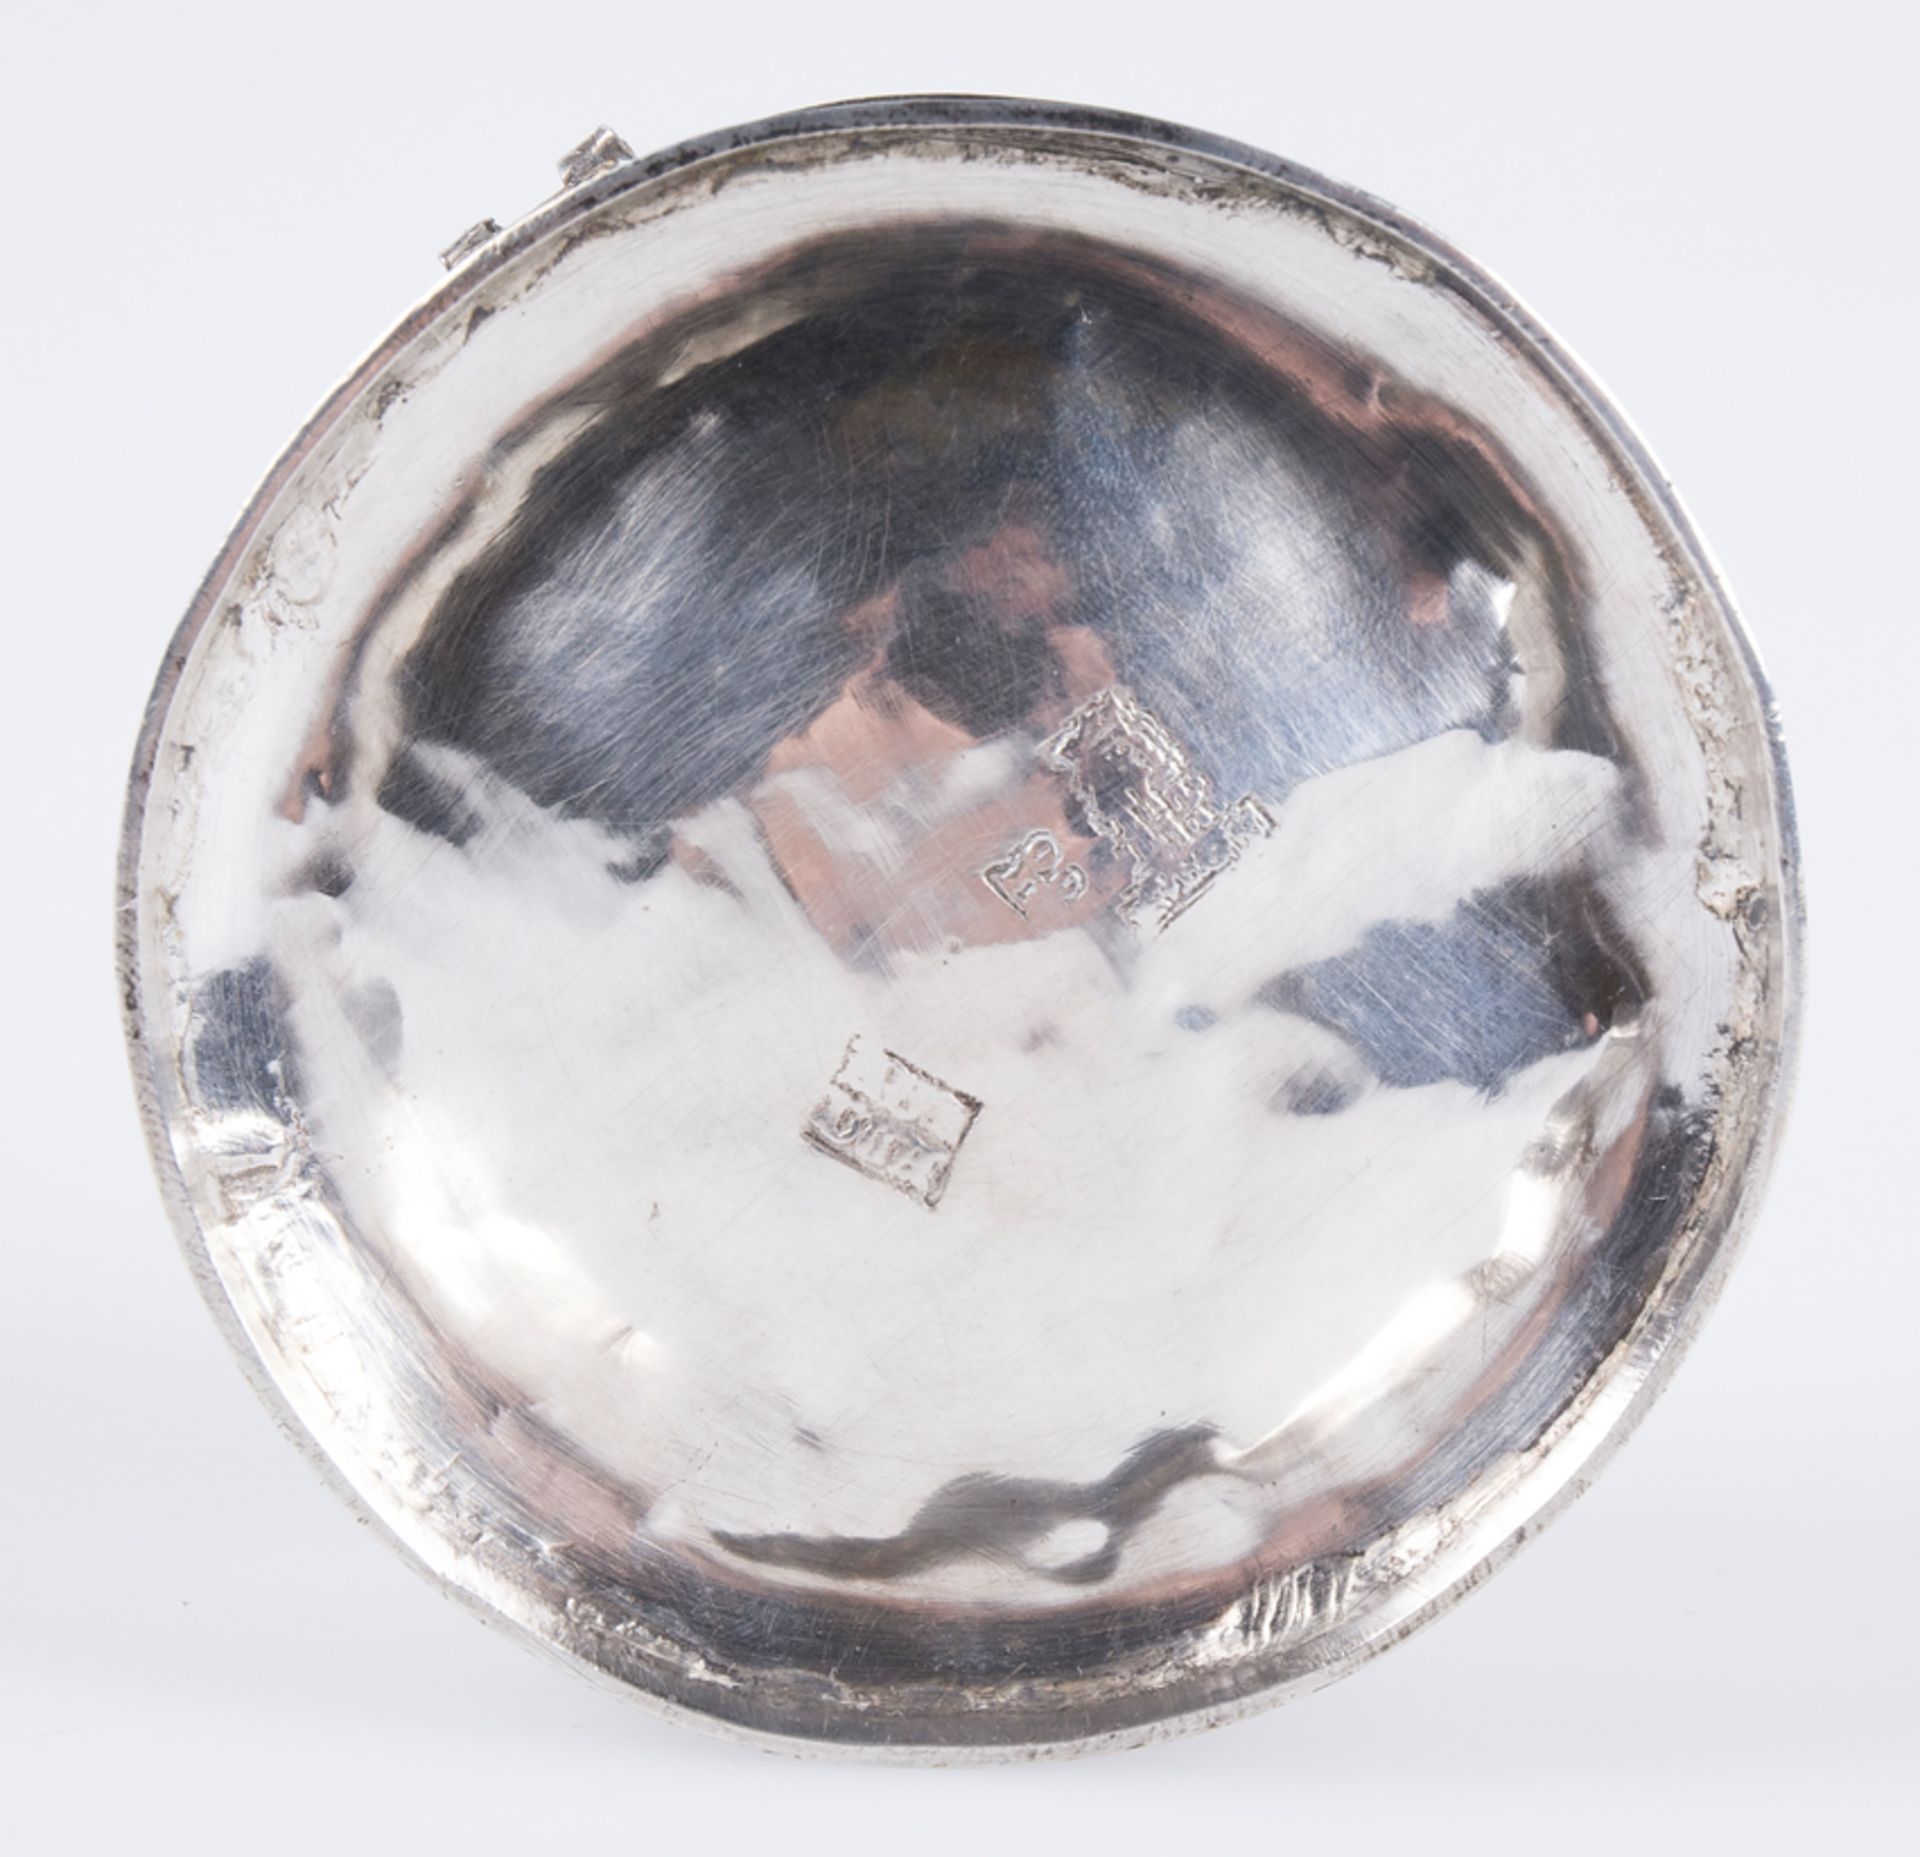 Spanish silver pyx with silver vermeil interior. Possibly Burgos. Gothic. 15th century. - Image 8 of 9